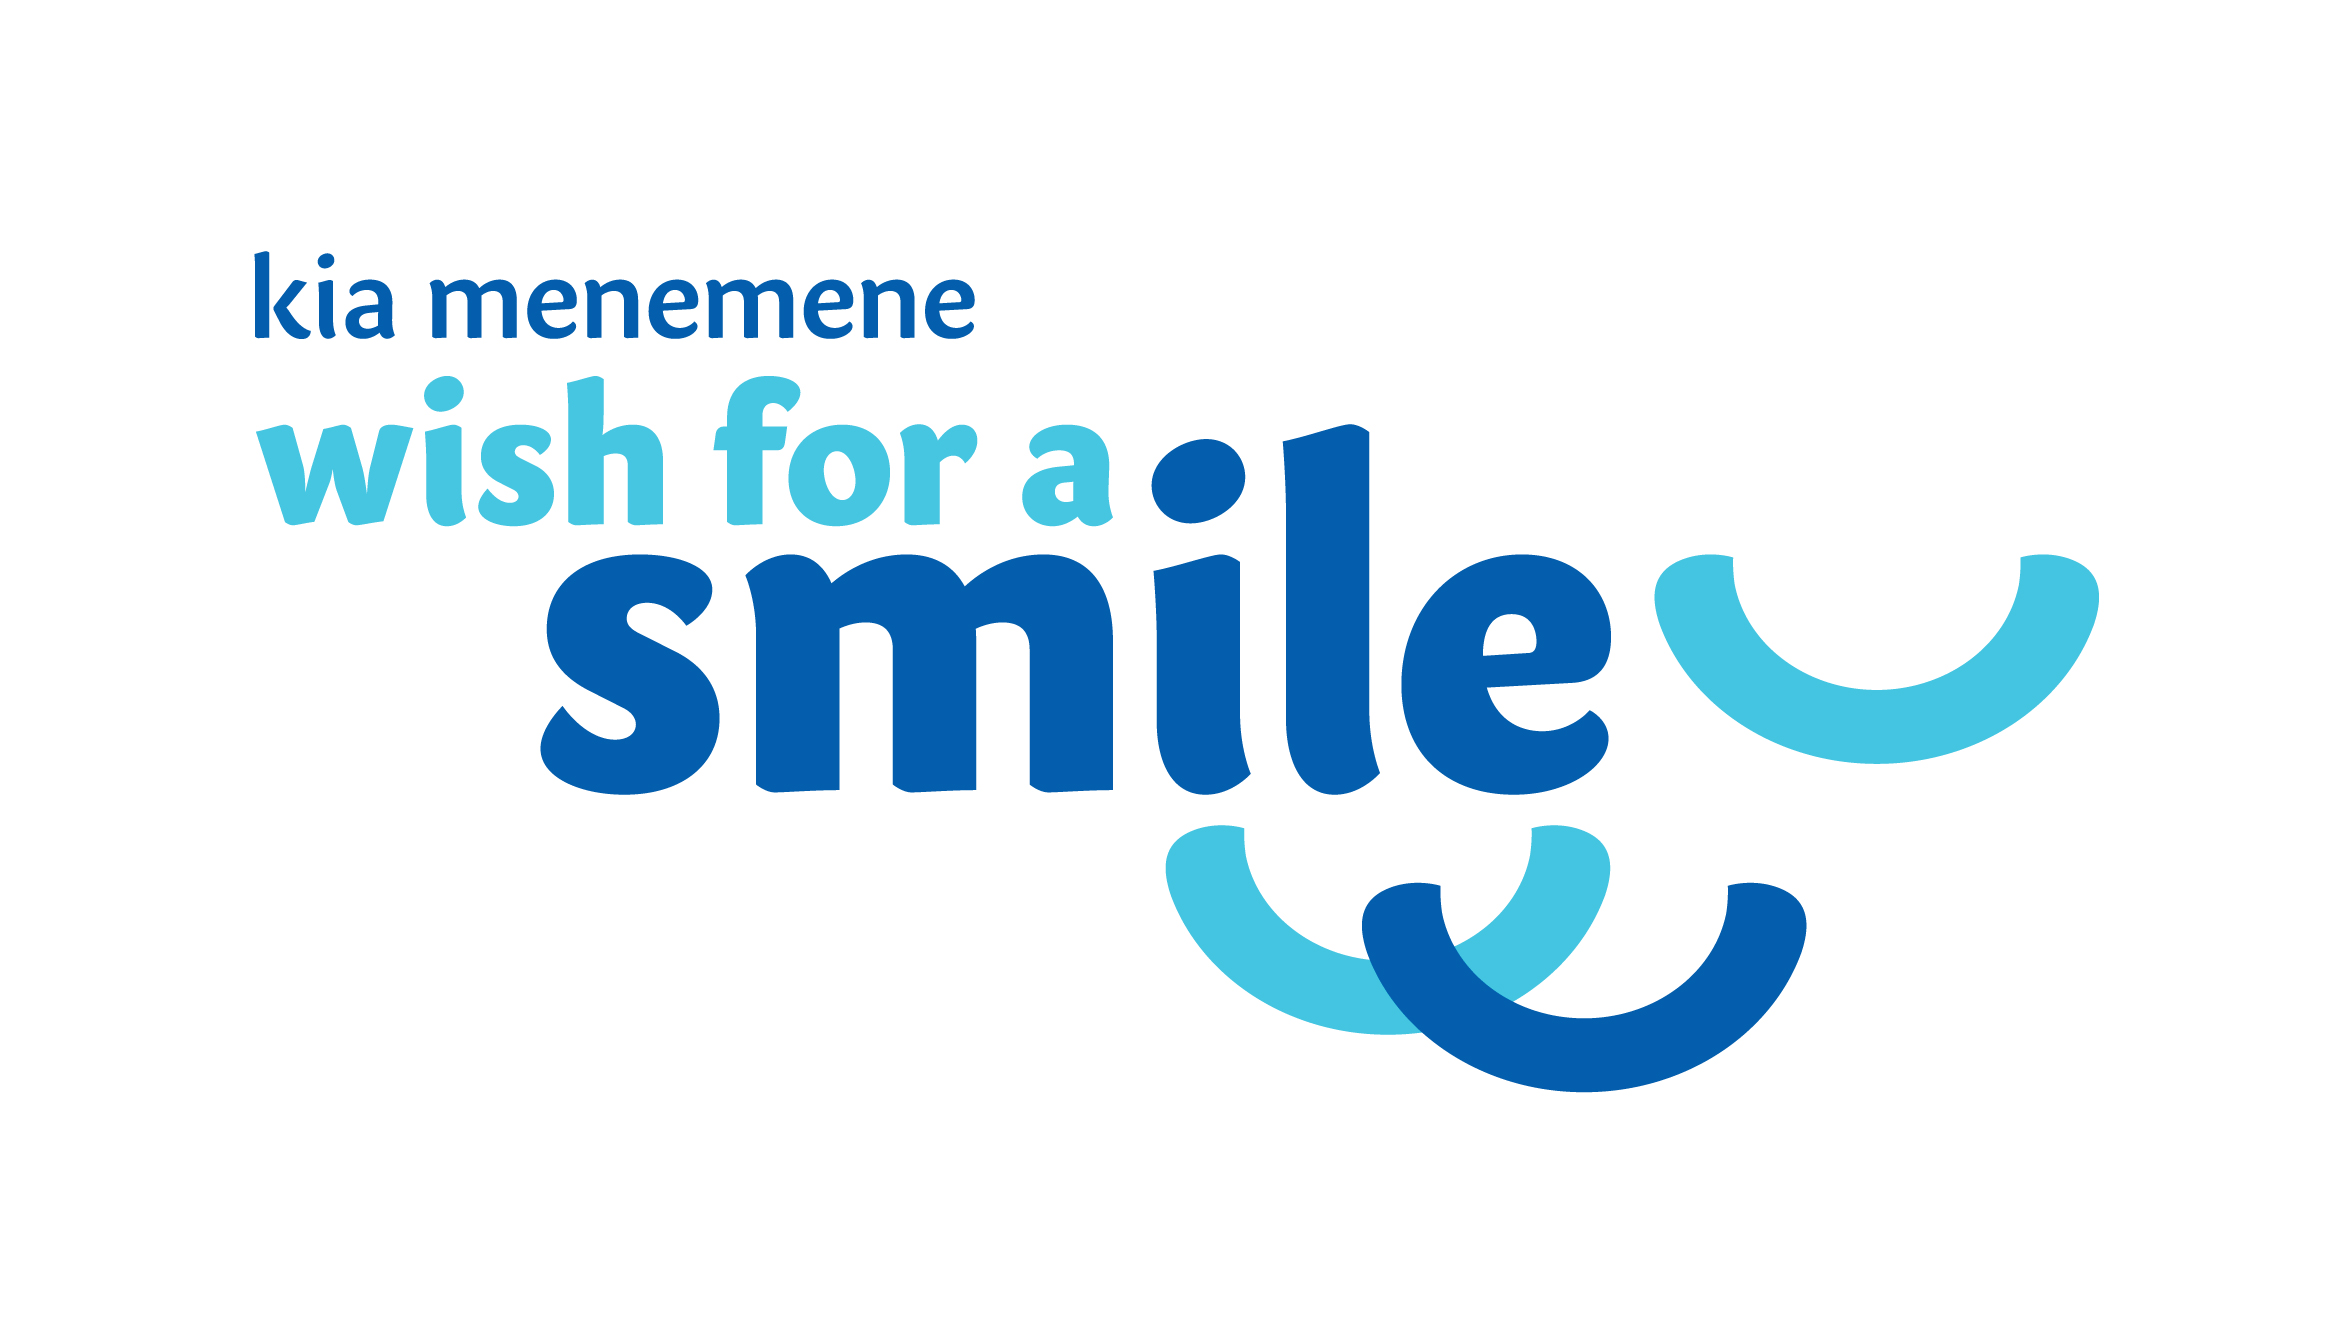 Help us transform lives, one smile at a time, by helping us develop our mission statement and PR plan!